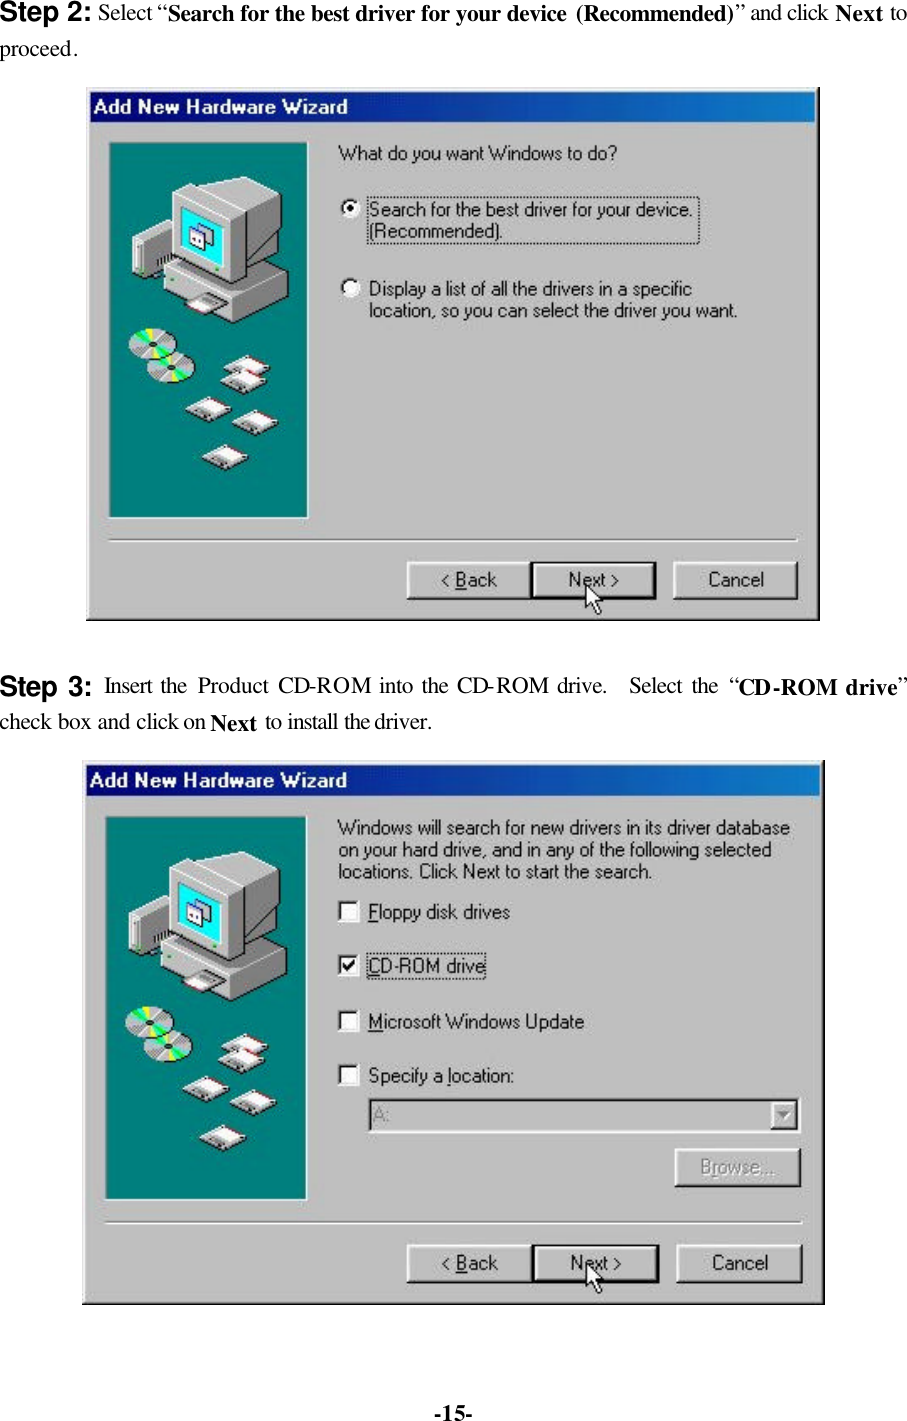   -15-Step 2: Select “Search for the best driver for your device (Recommended)” and click Next to proceed.  Step 3: Insert the Product CD-ROM into the CD-ROM drive.   Select the “CD-ROM drive” check box and click on Next to install the driver.   